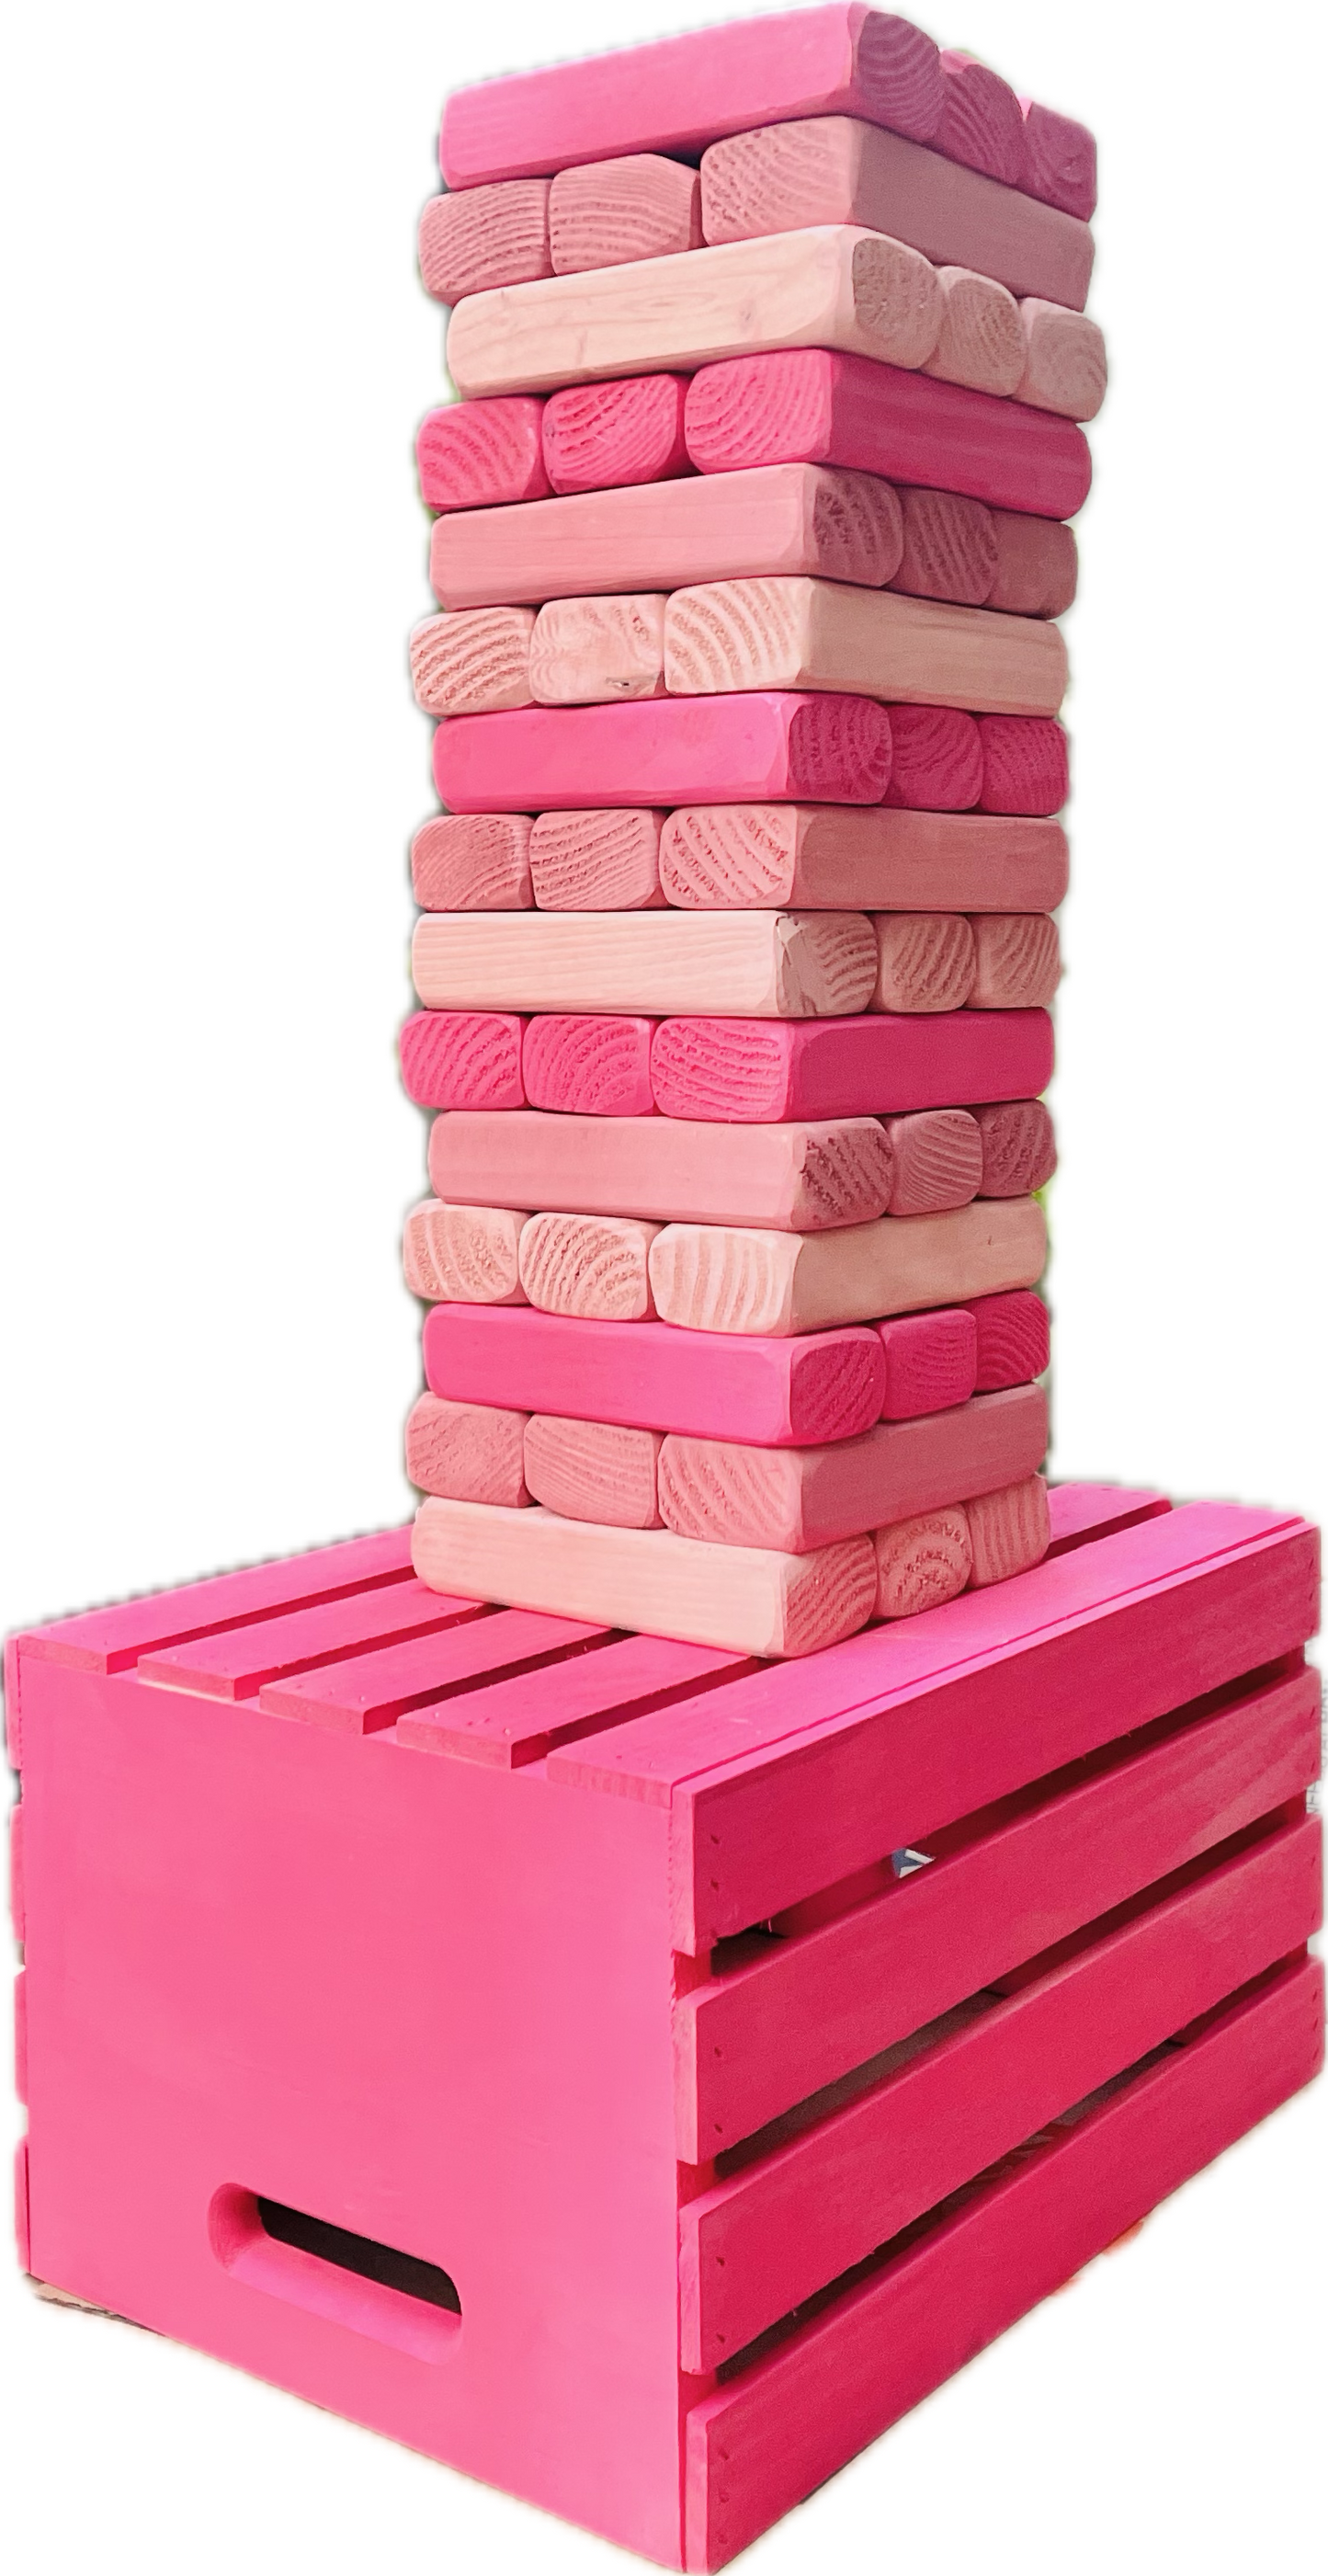 GIANT Tumble Tower GAME Pink, Pink, Pink + CRATE & STAND